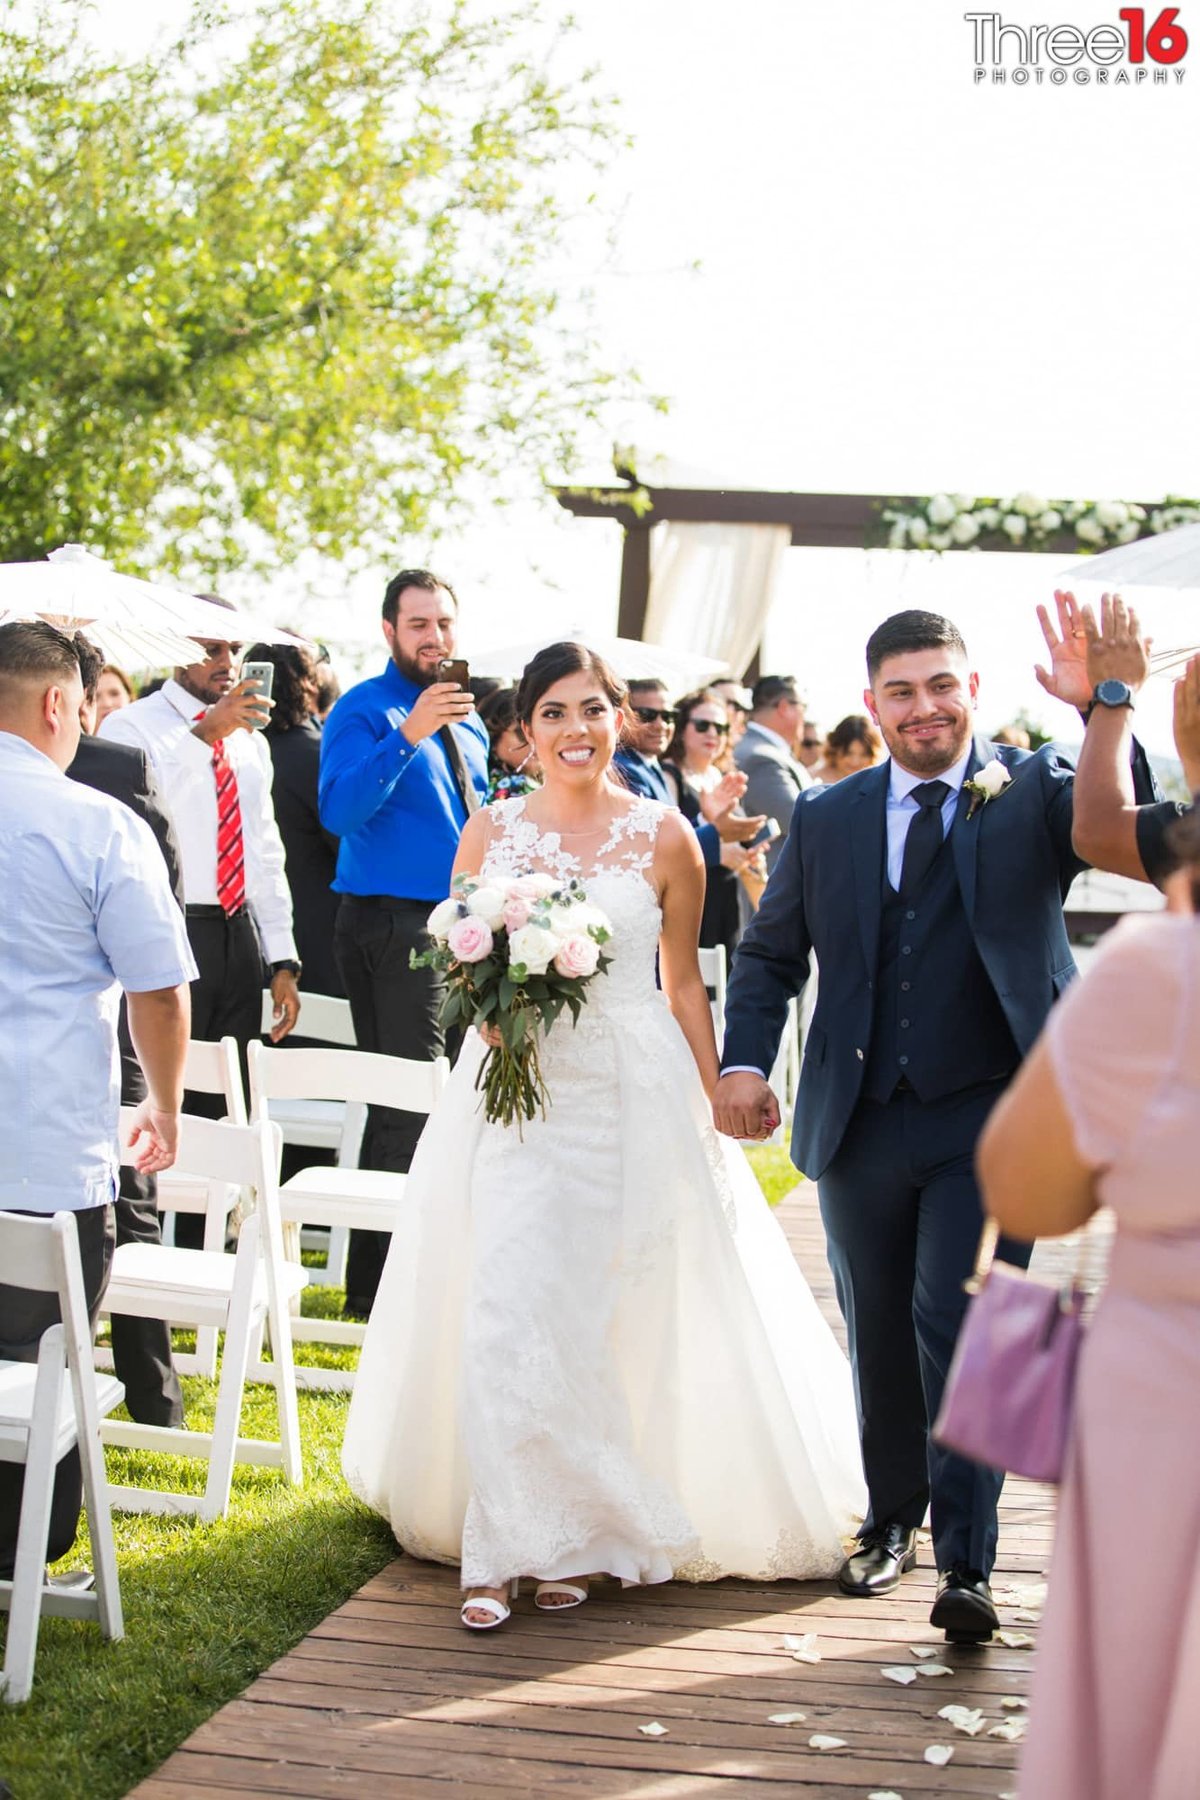 Newly married couple walk together down the aisle